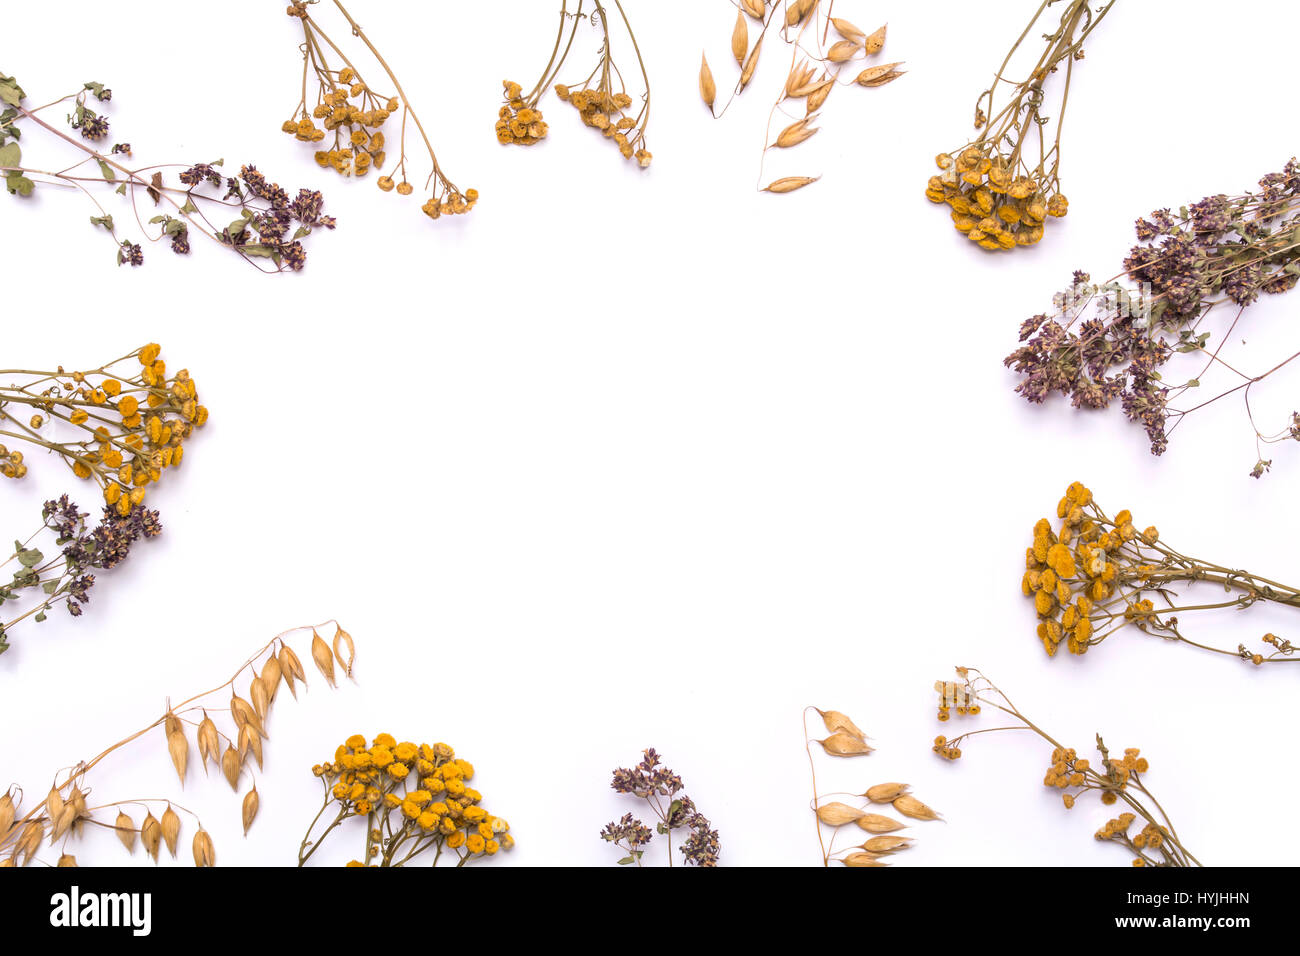 Flat lay frame. Dry branches of tansy and heather on a white background. Calluna vulgaris and Tanacetum view from above. Stock Photo